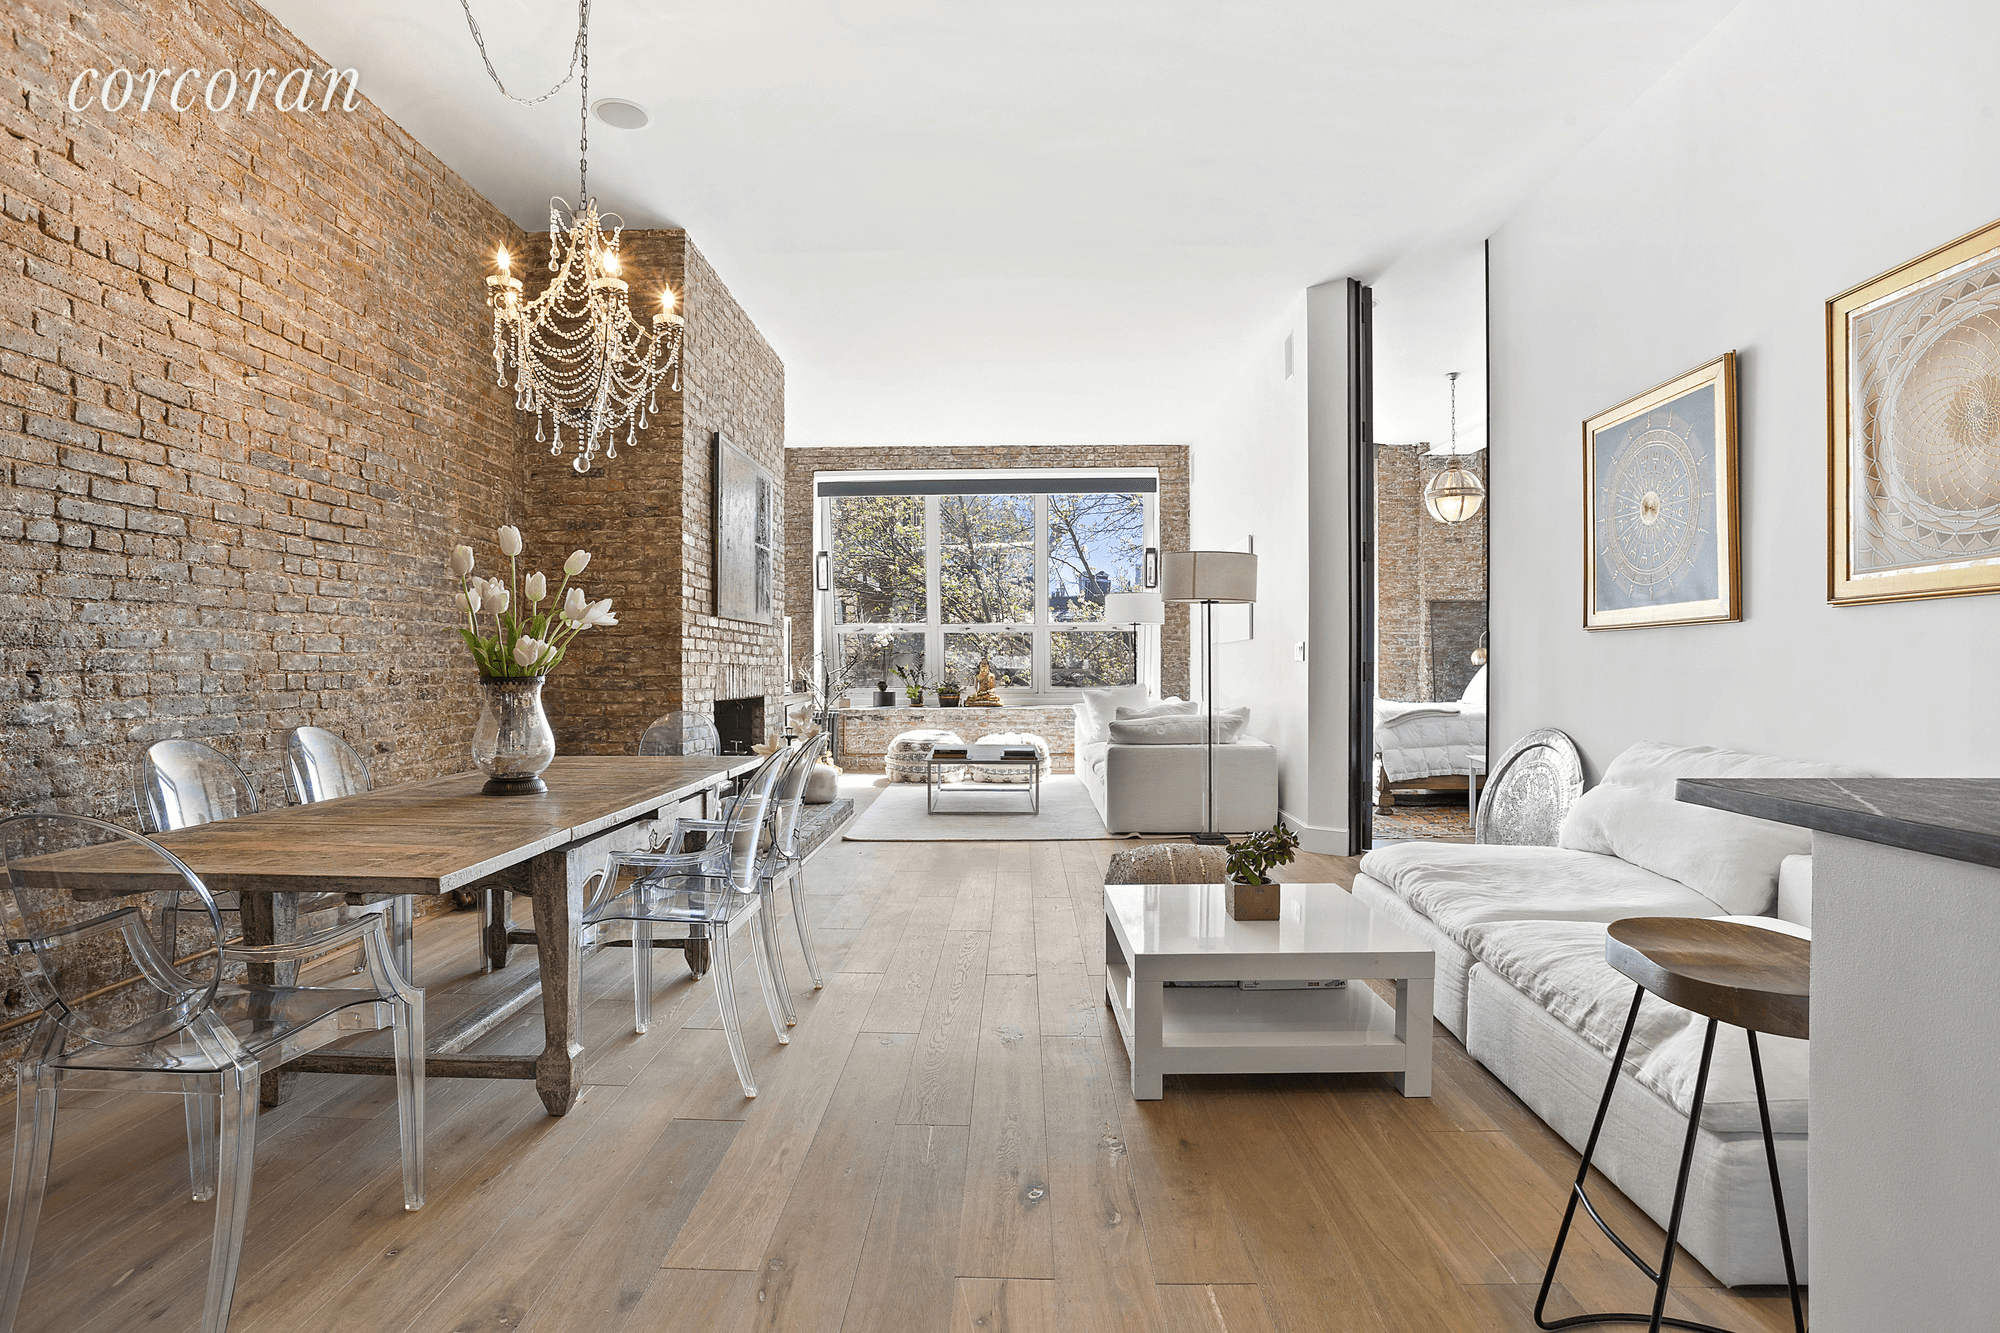 This rarely available, beautifully gut renovated one bedroom plus home office loft w 12 foot ceilings, is an exceptional find in the sought after West Village.